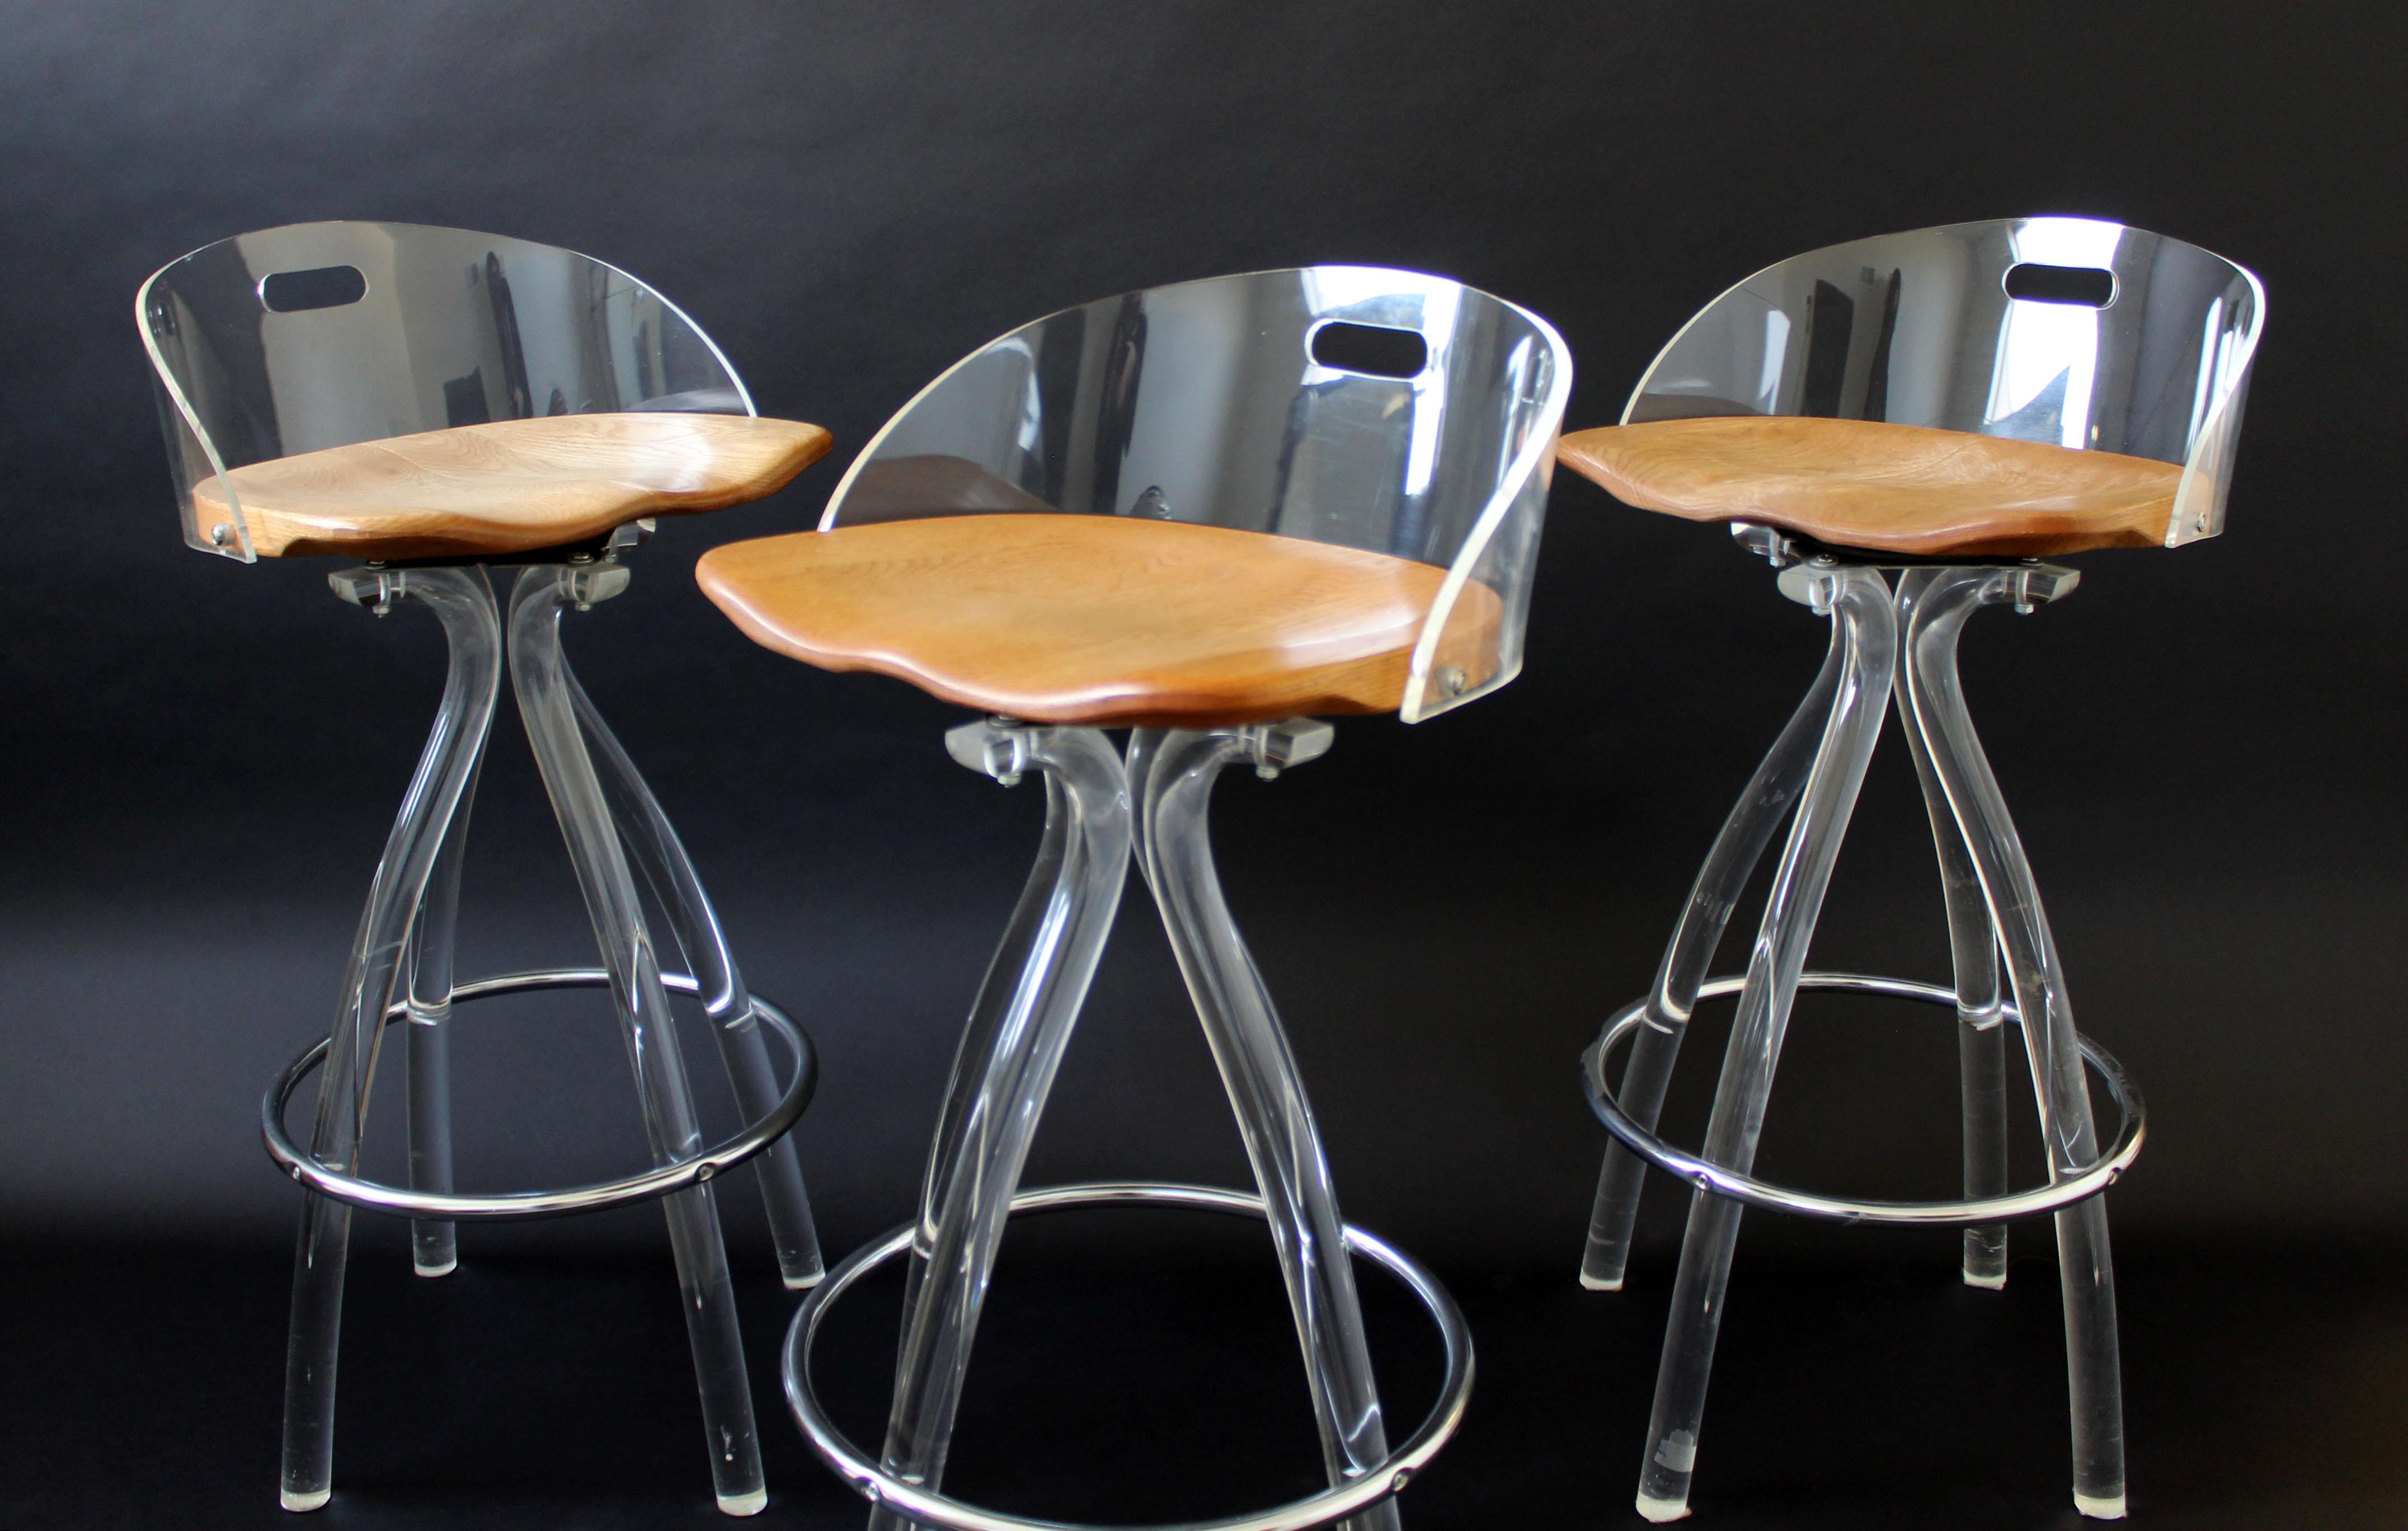 American Mid-Century Modern Set of 3 Lucite Wood Saddle Seat Bar Stools by Hill Mfg 1970s